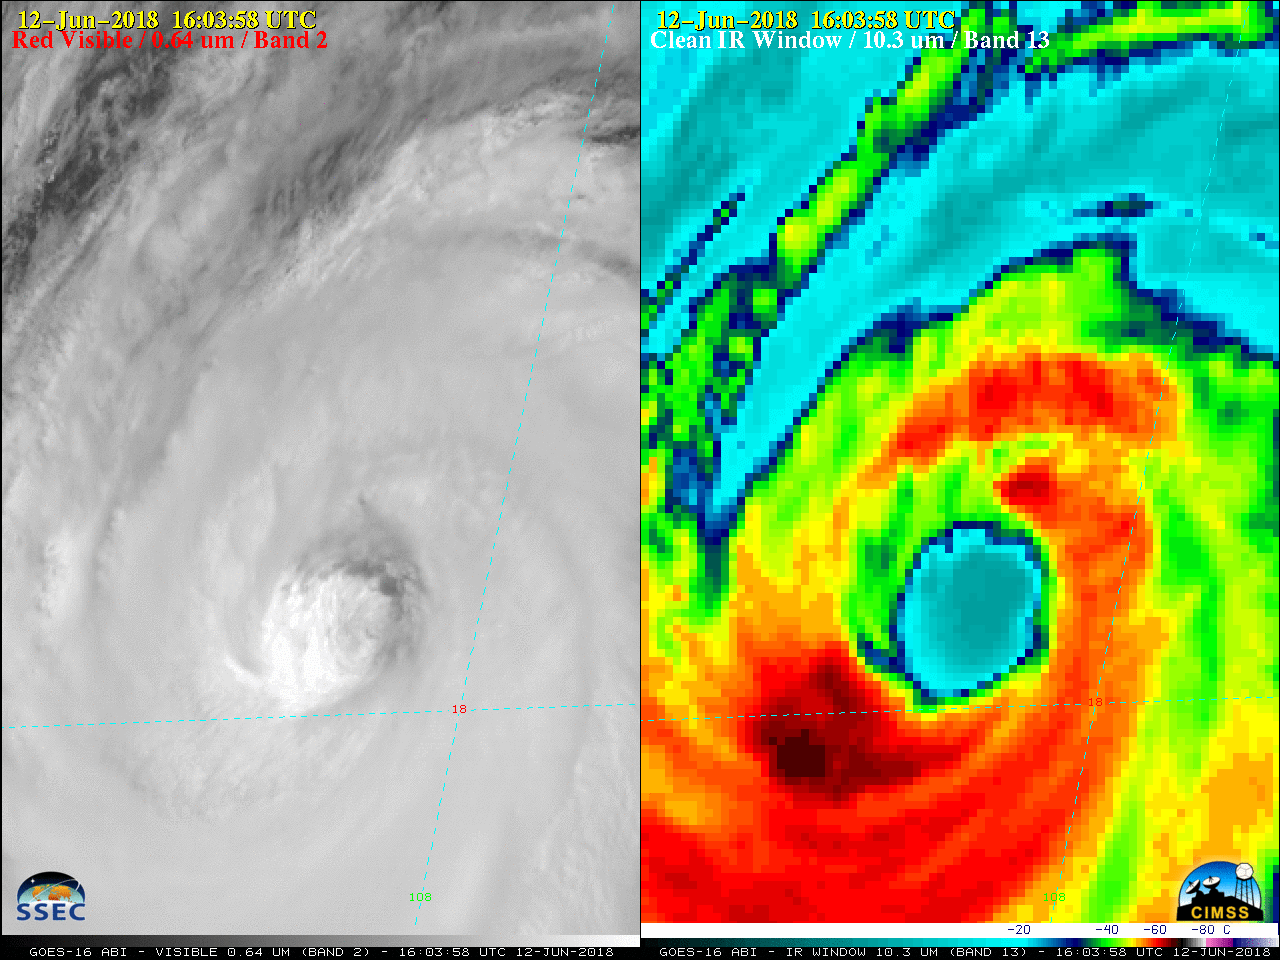 GOES-16 "Red" Visible (0.64 µm, left) and "Clean" Infrared Window (10.3 µm, right) images [click to play MP4 animation]